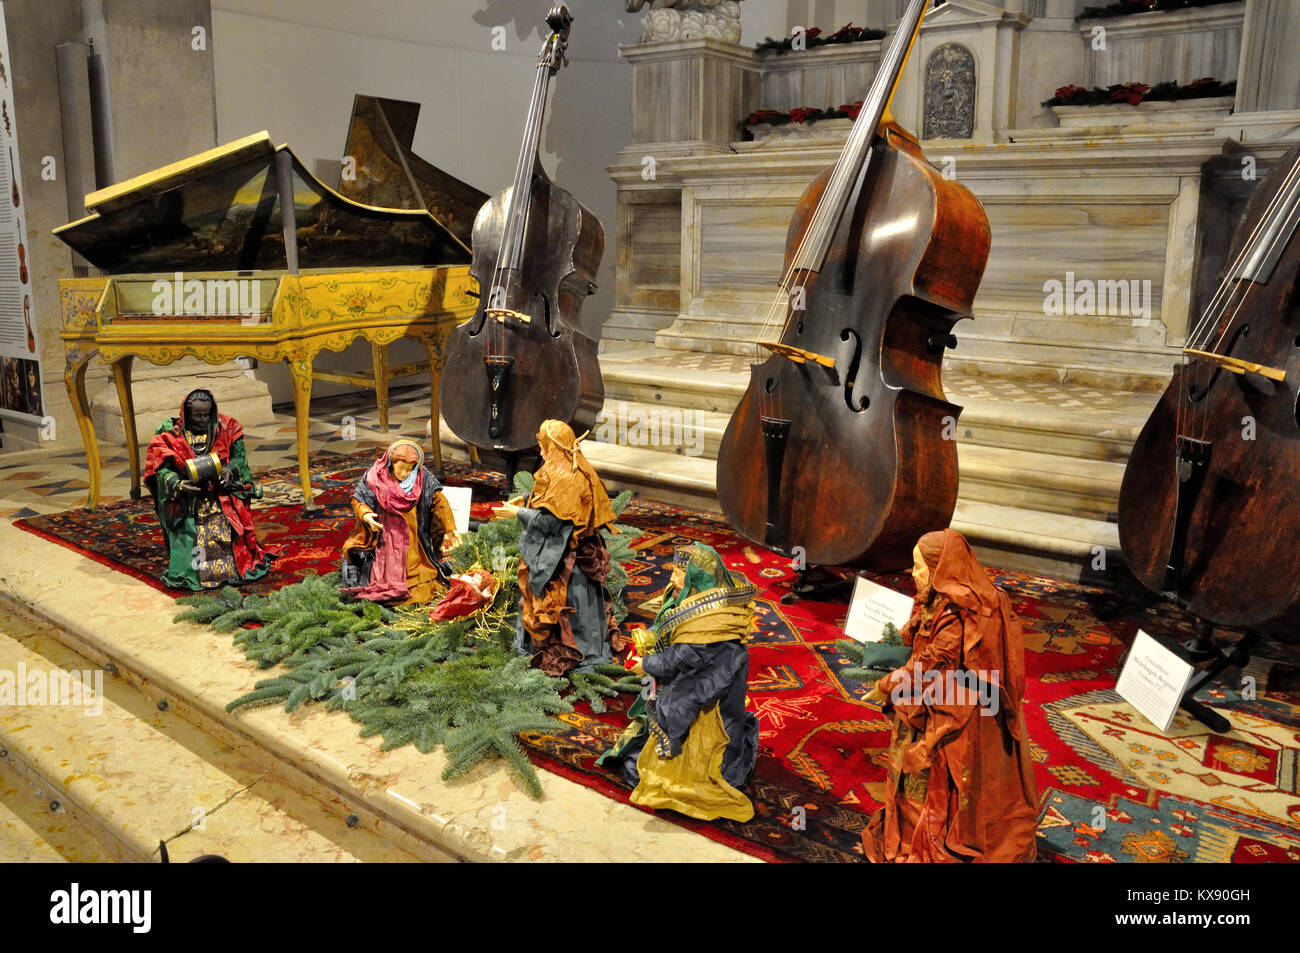 Nativity scene with antique musical instruments in Venice, Italy Stock Photo